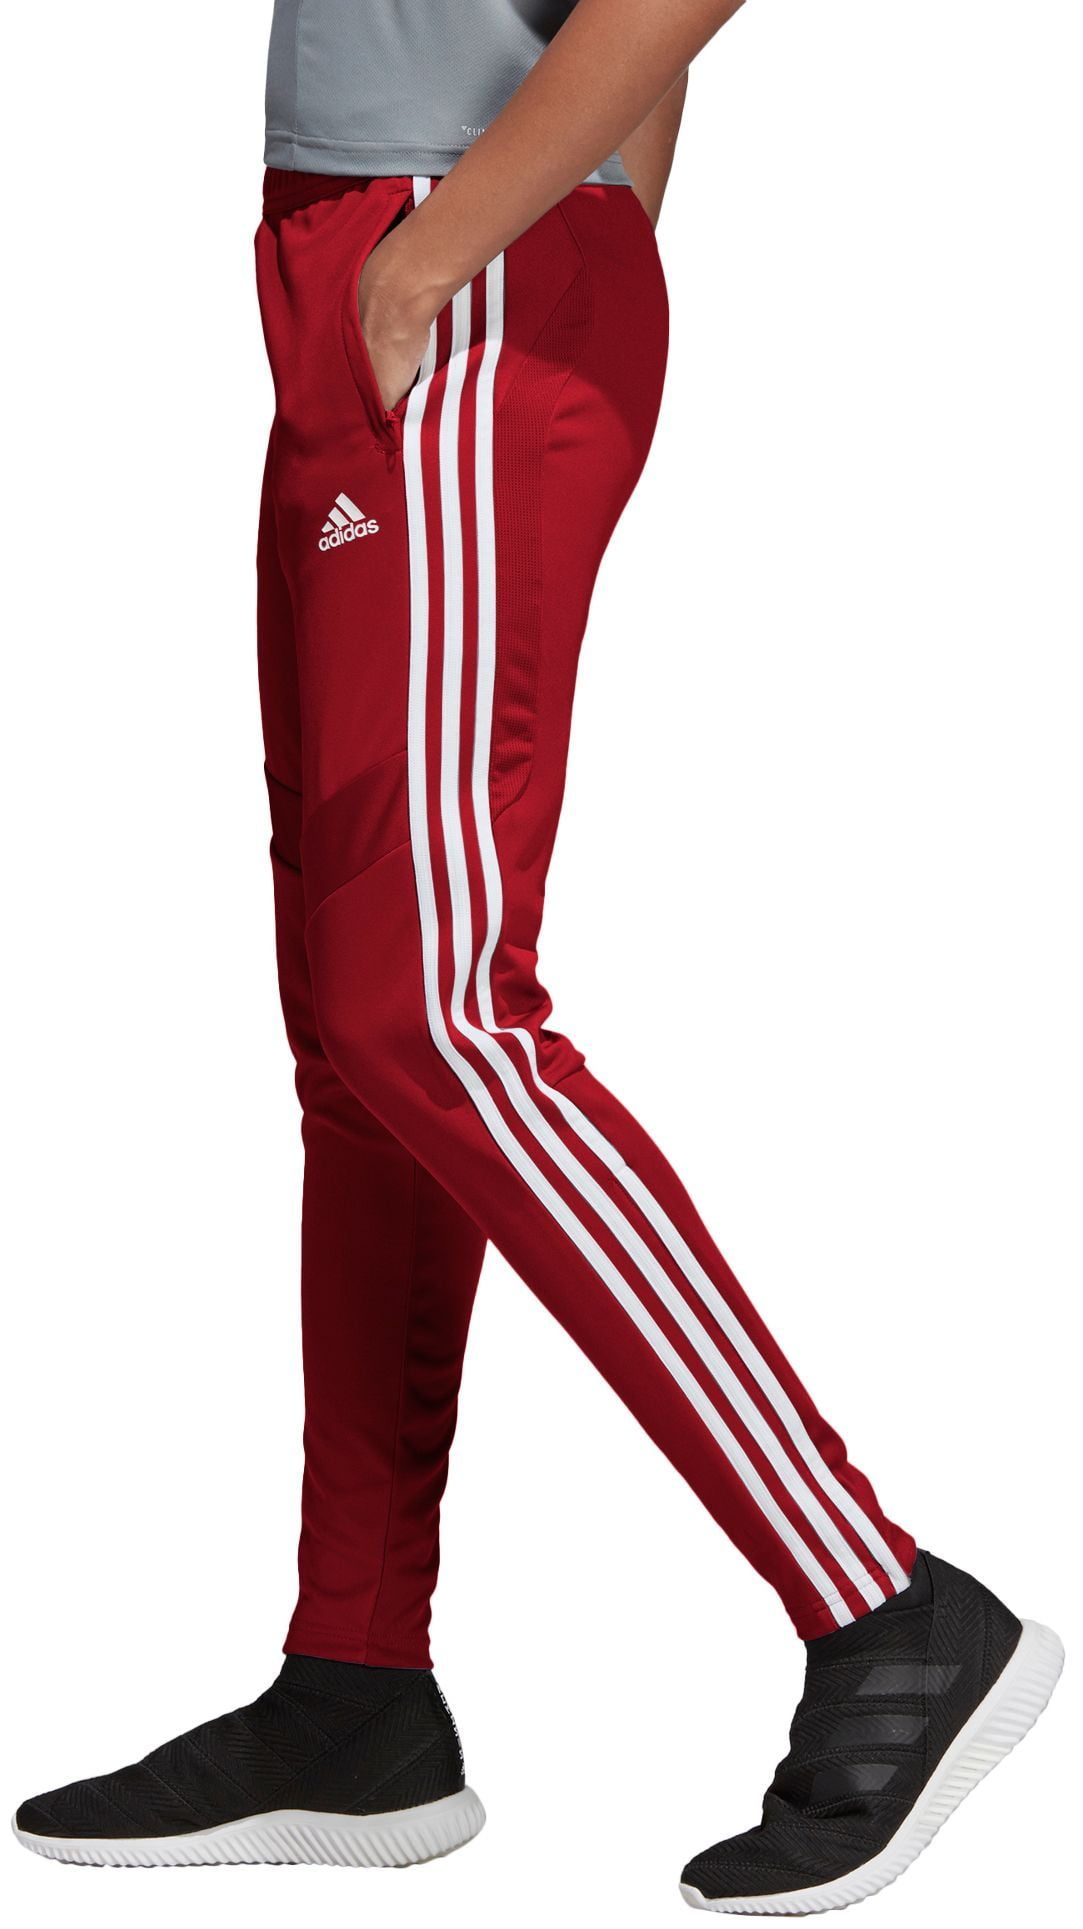 adidas power red pants